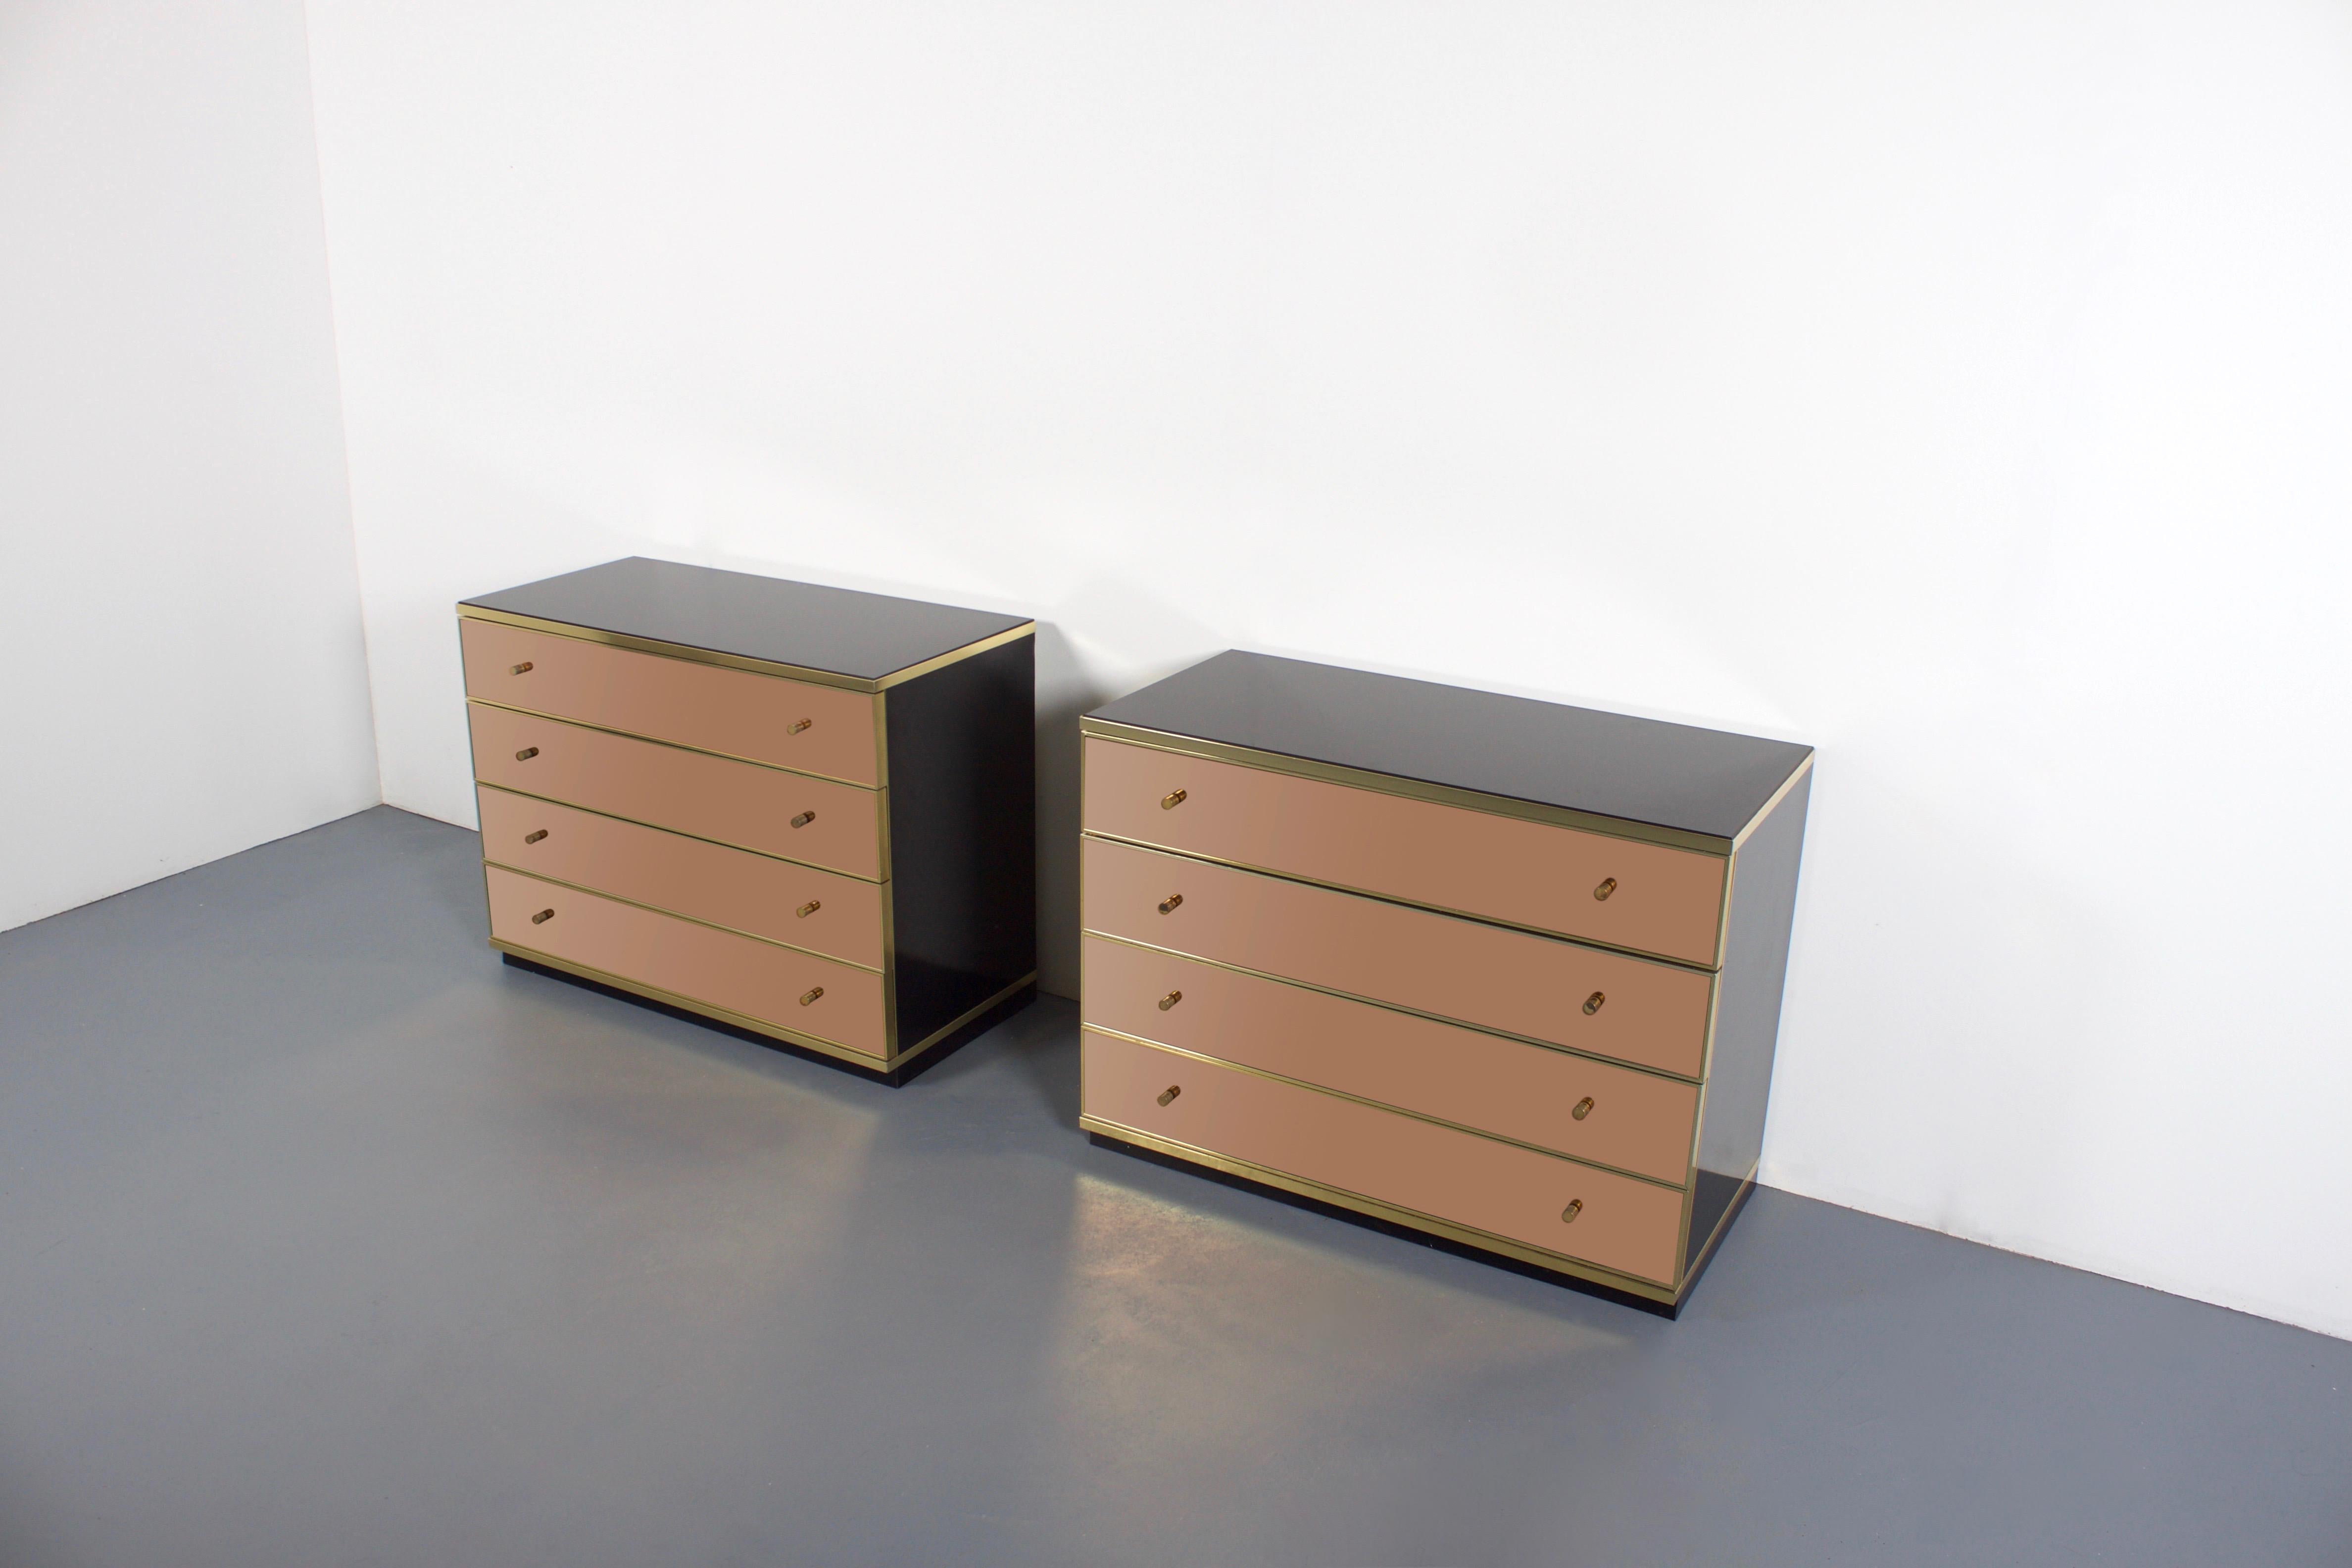 Two stunning Italian metal arte sideboards in very good condition.

Designed by Renato Zevi in the 1970s

The sideboards have a glossy black glass top and lacquered black side panels
with brass details.

The four drawers have gold mirrored glass